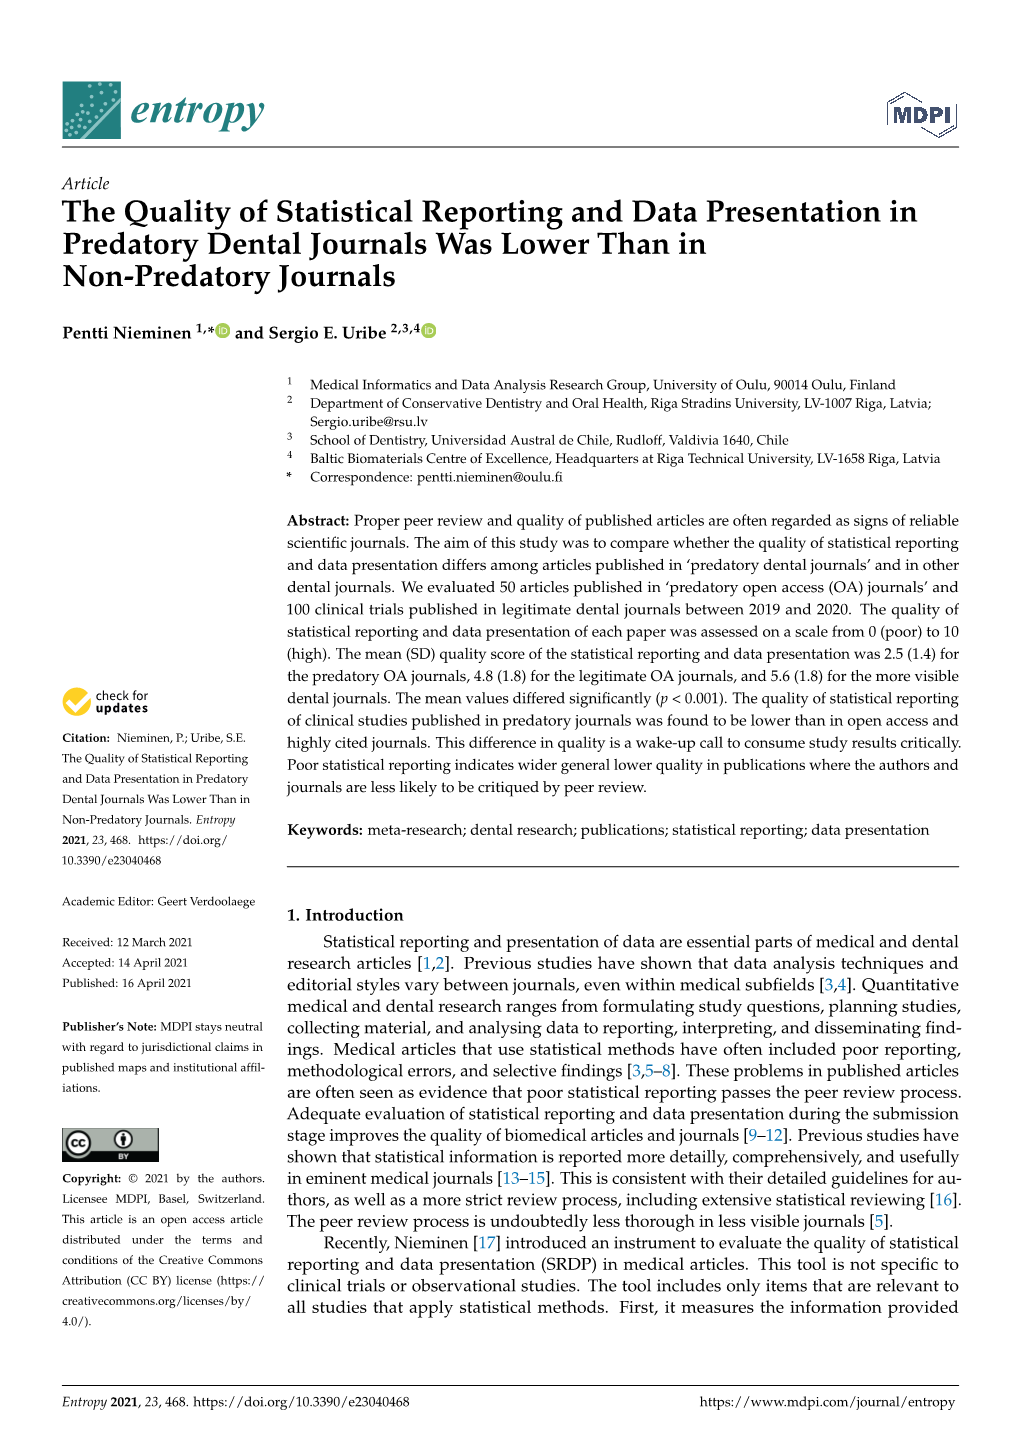 The Quality of Statistical Reporting and Data Presentation in Predatory Dental Journals Was Lower Than in Non-Predatory Journals